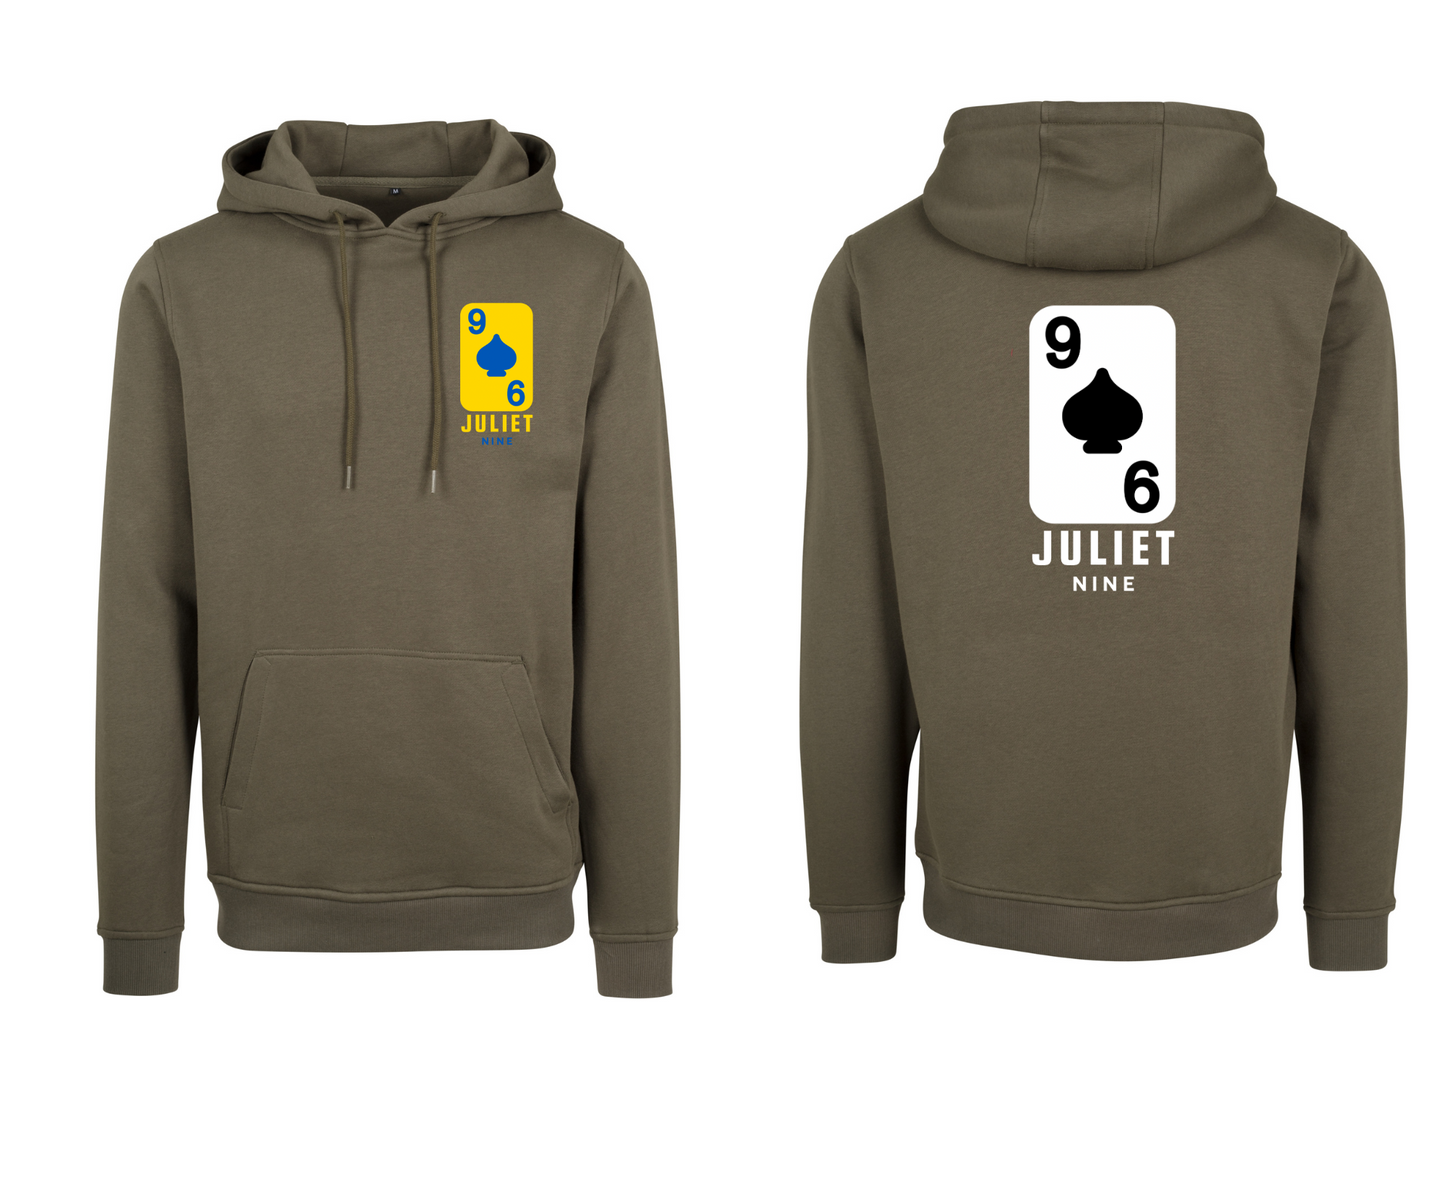 Juliet9 High Quality Hoody - Olive Green